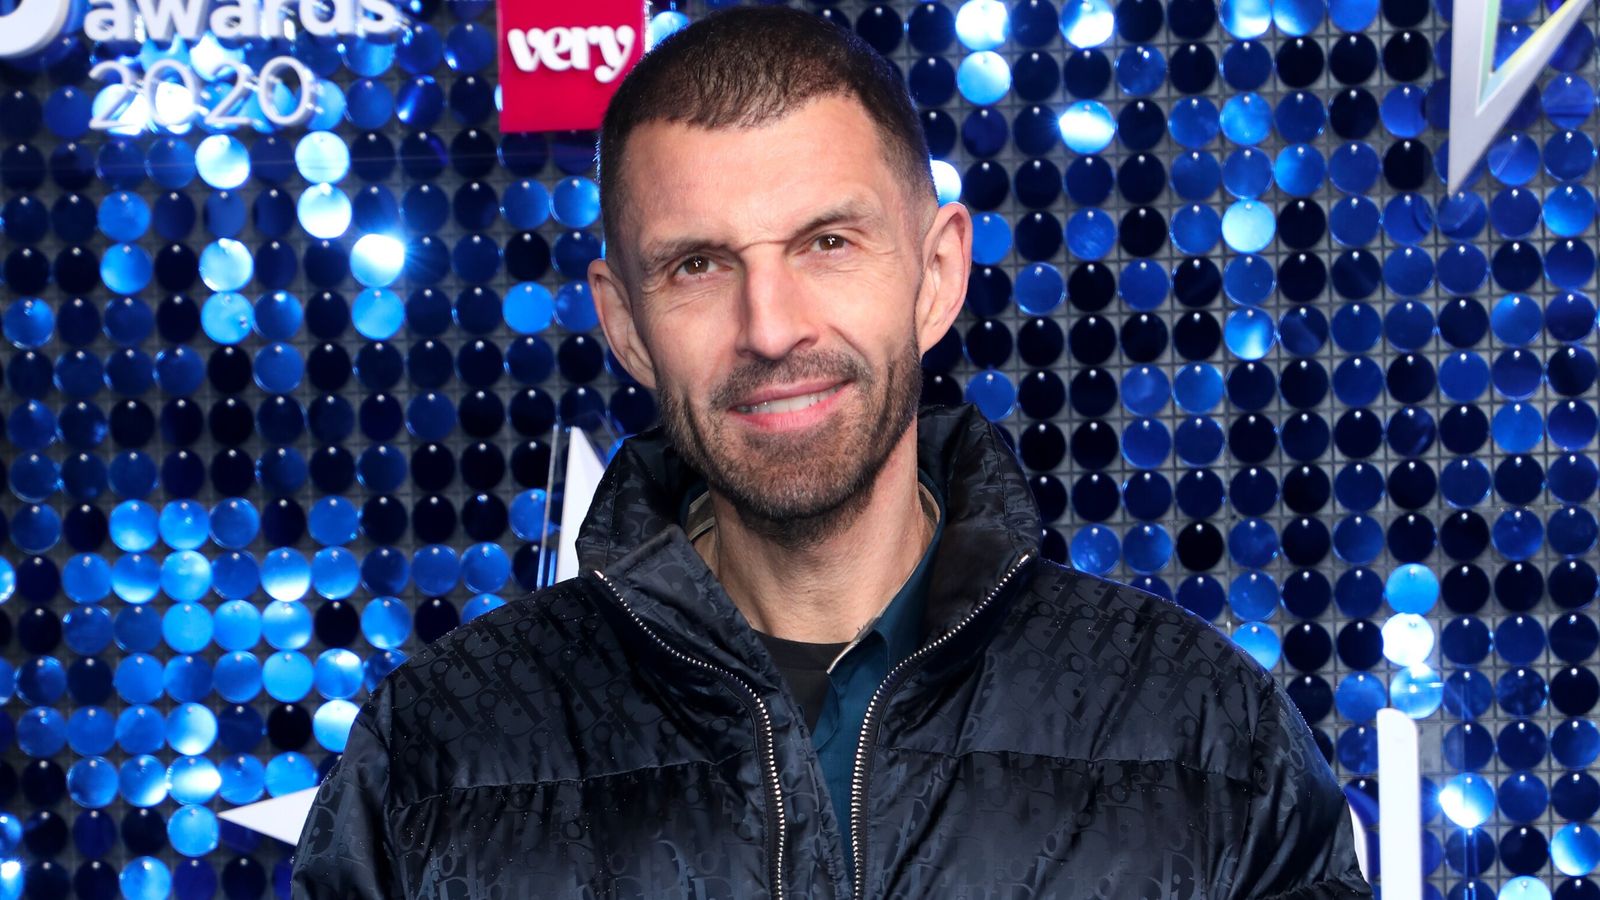 Tim Westwood: Former BBC Radio 1 DJ questioned twice over alleged sex offences